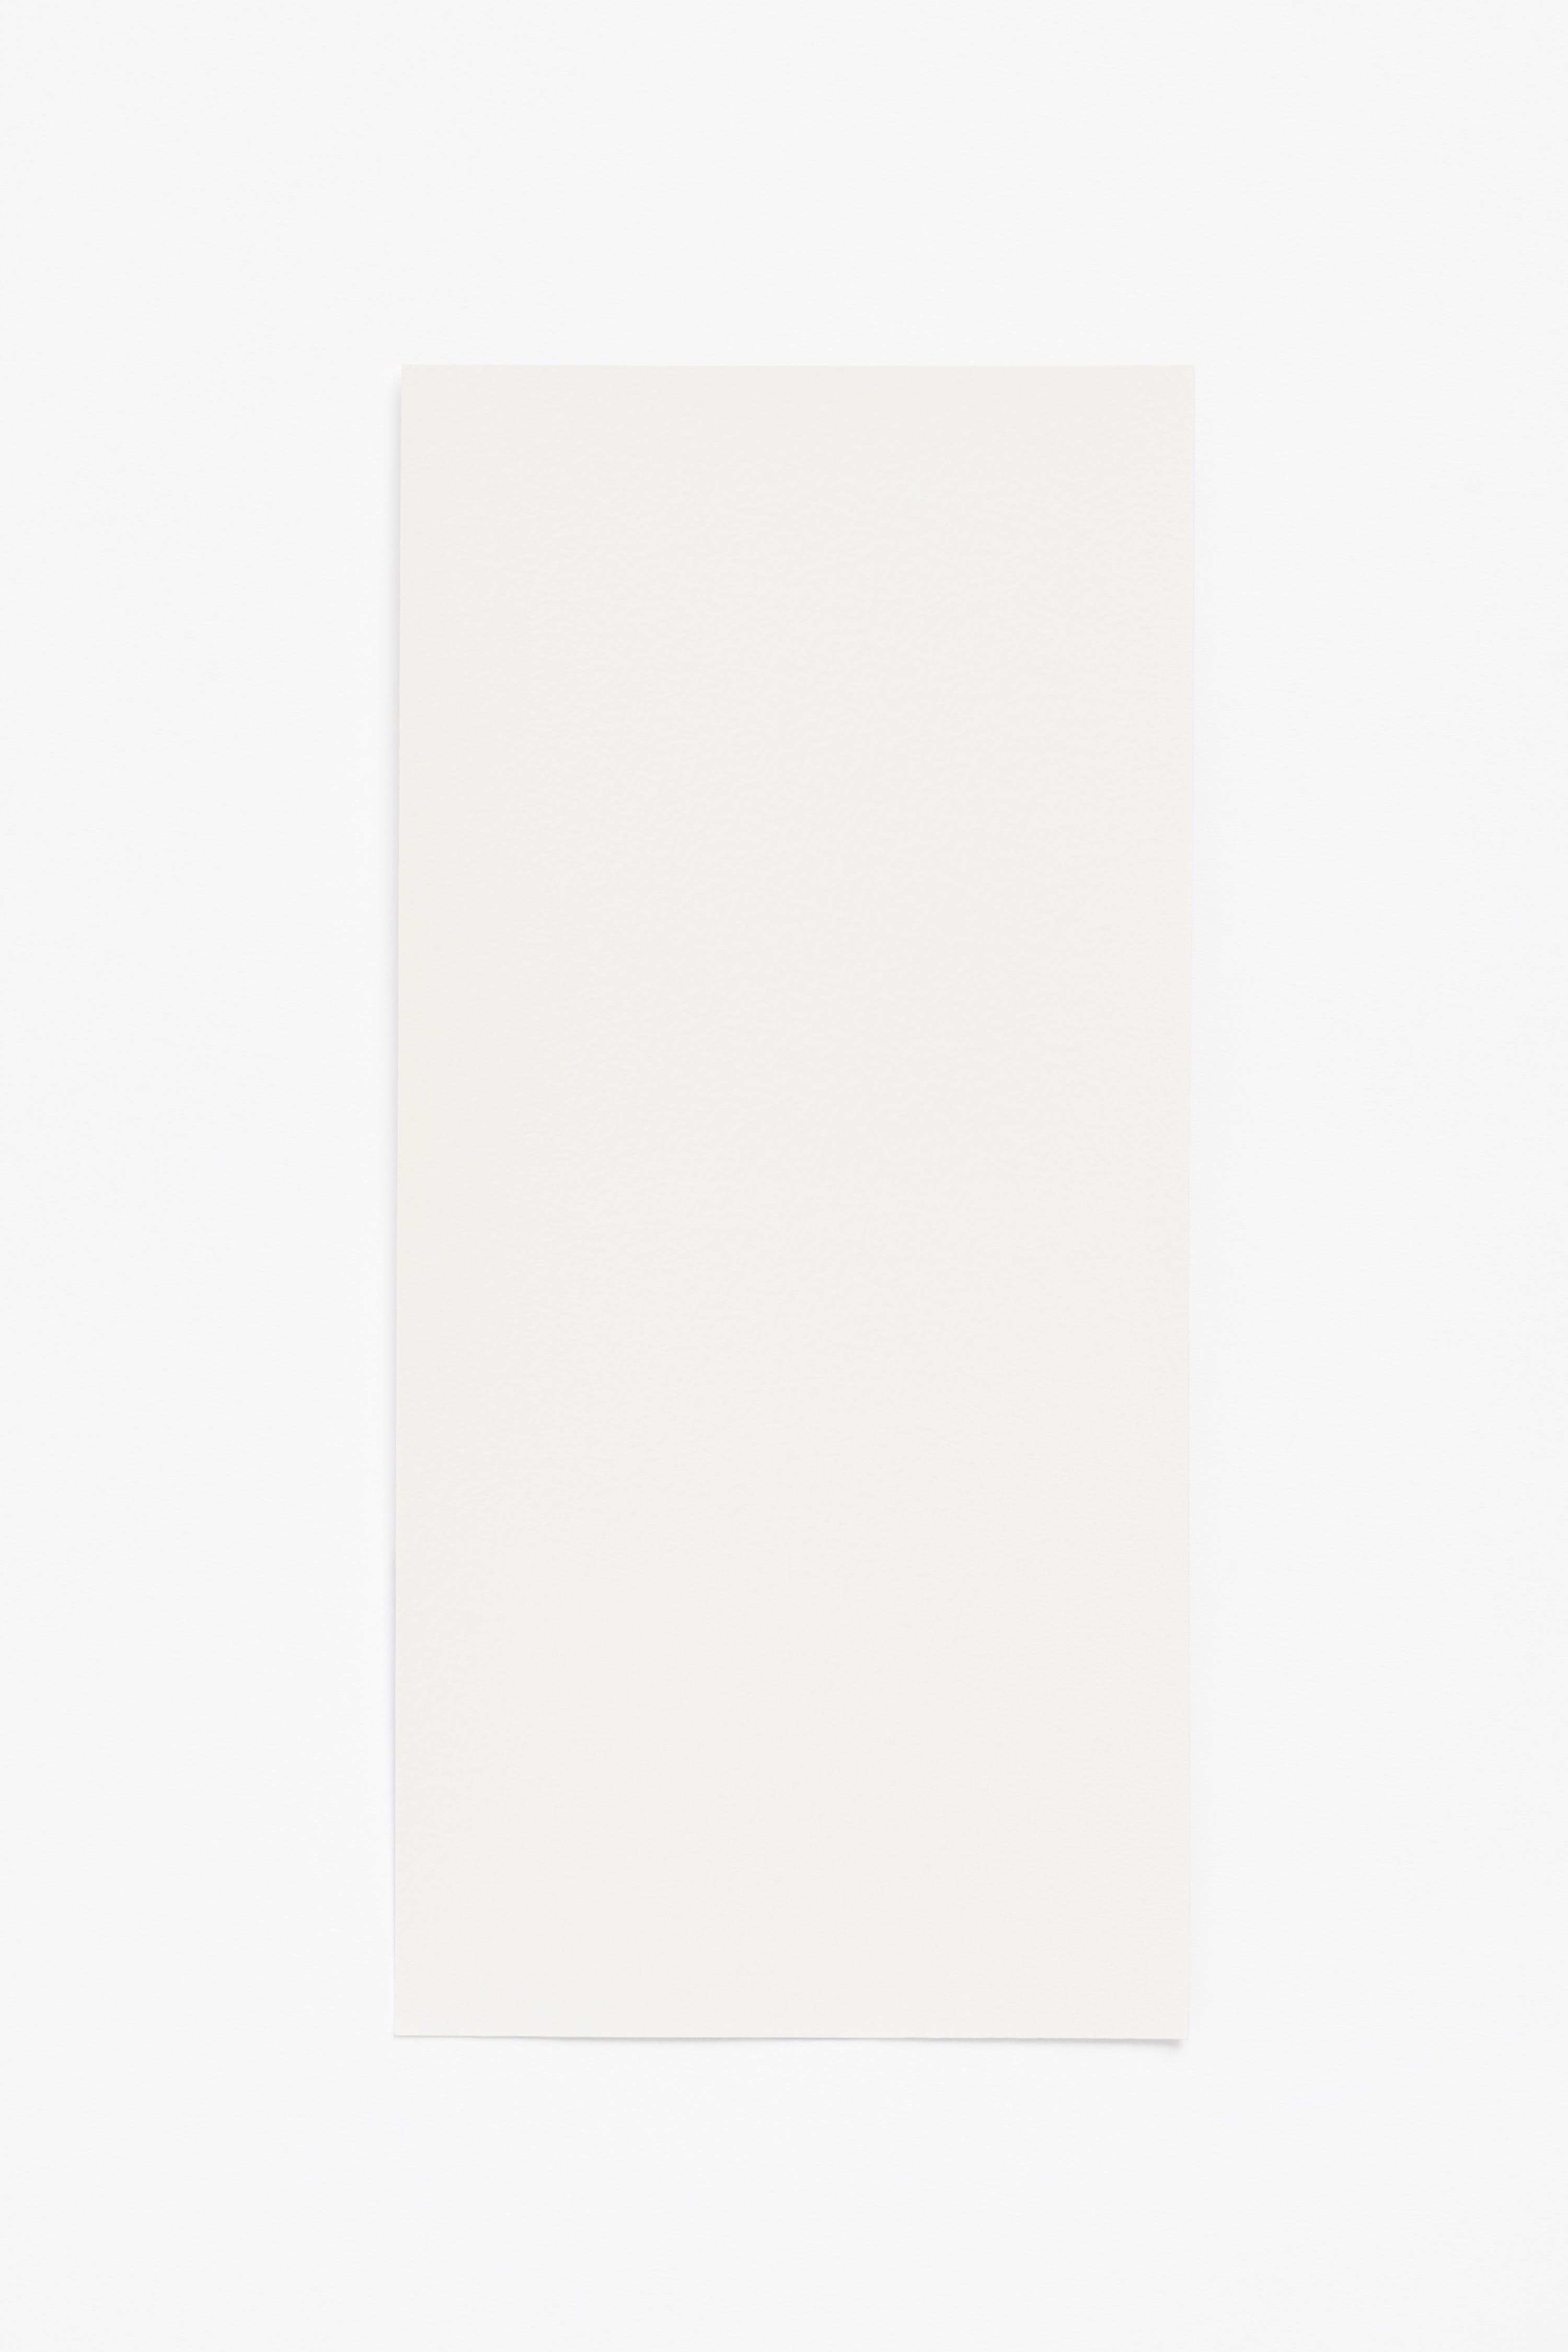 Morning Frost — a paint colour developed by Norm Architects for Blēo